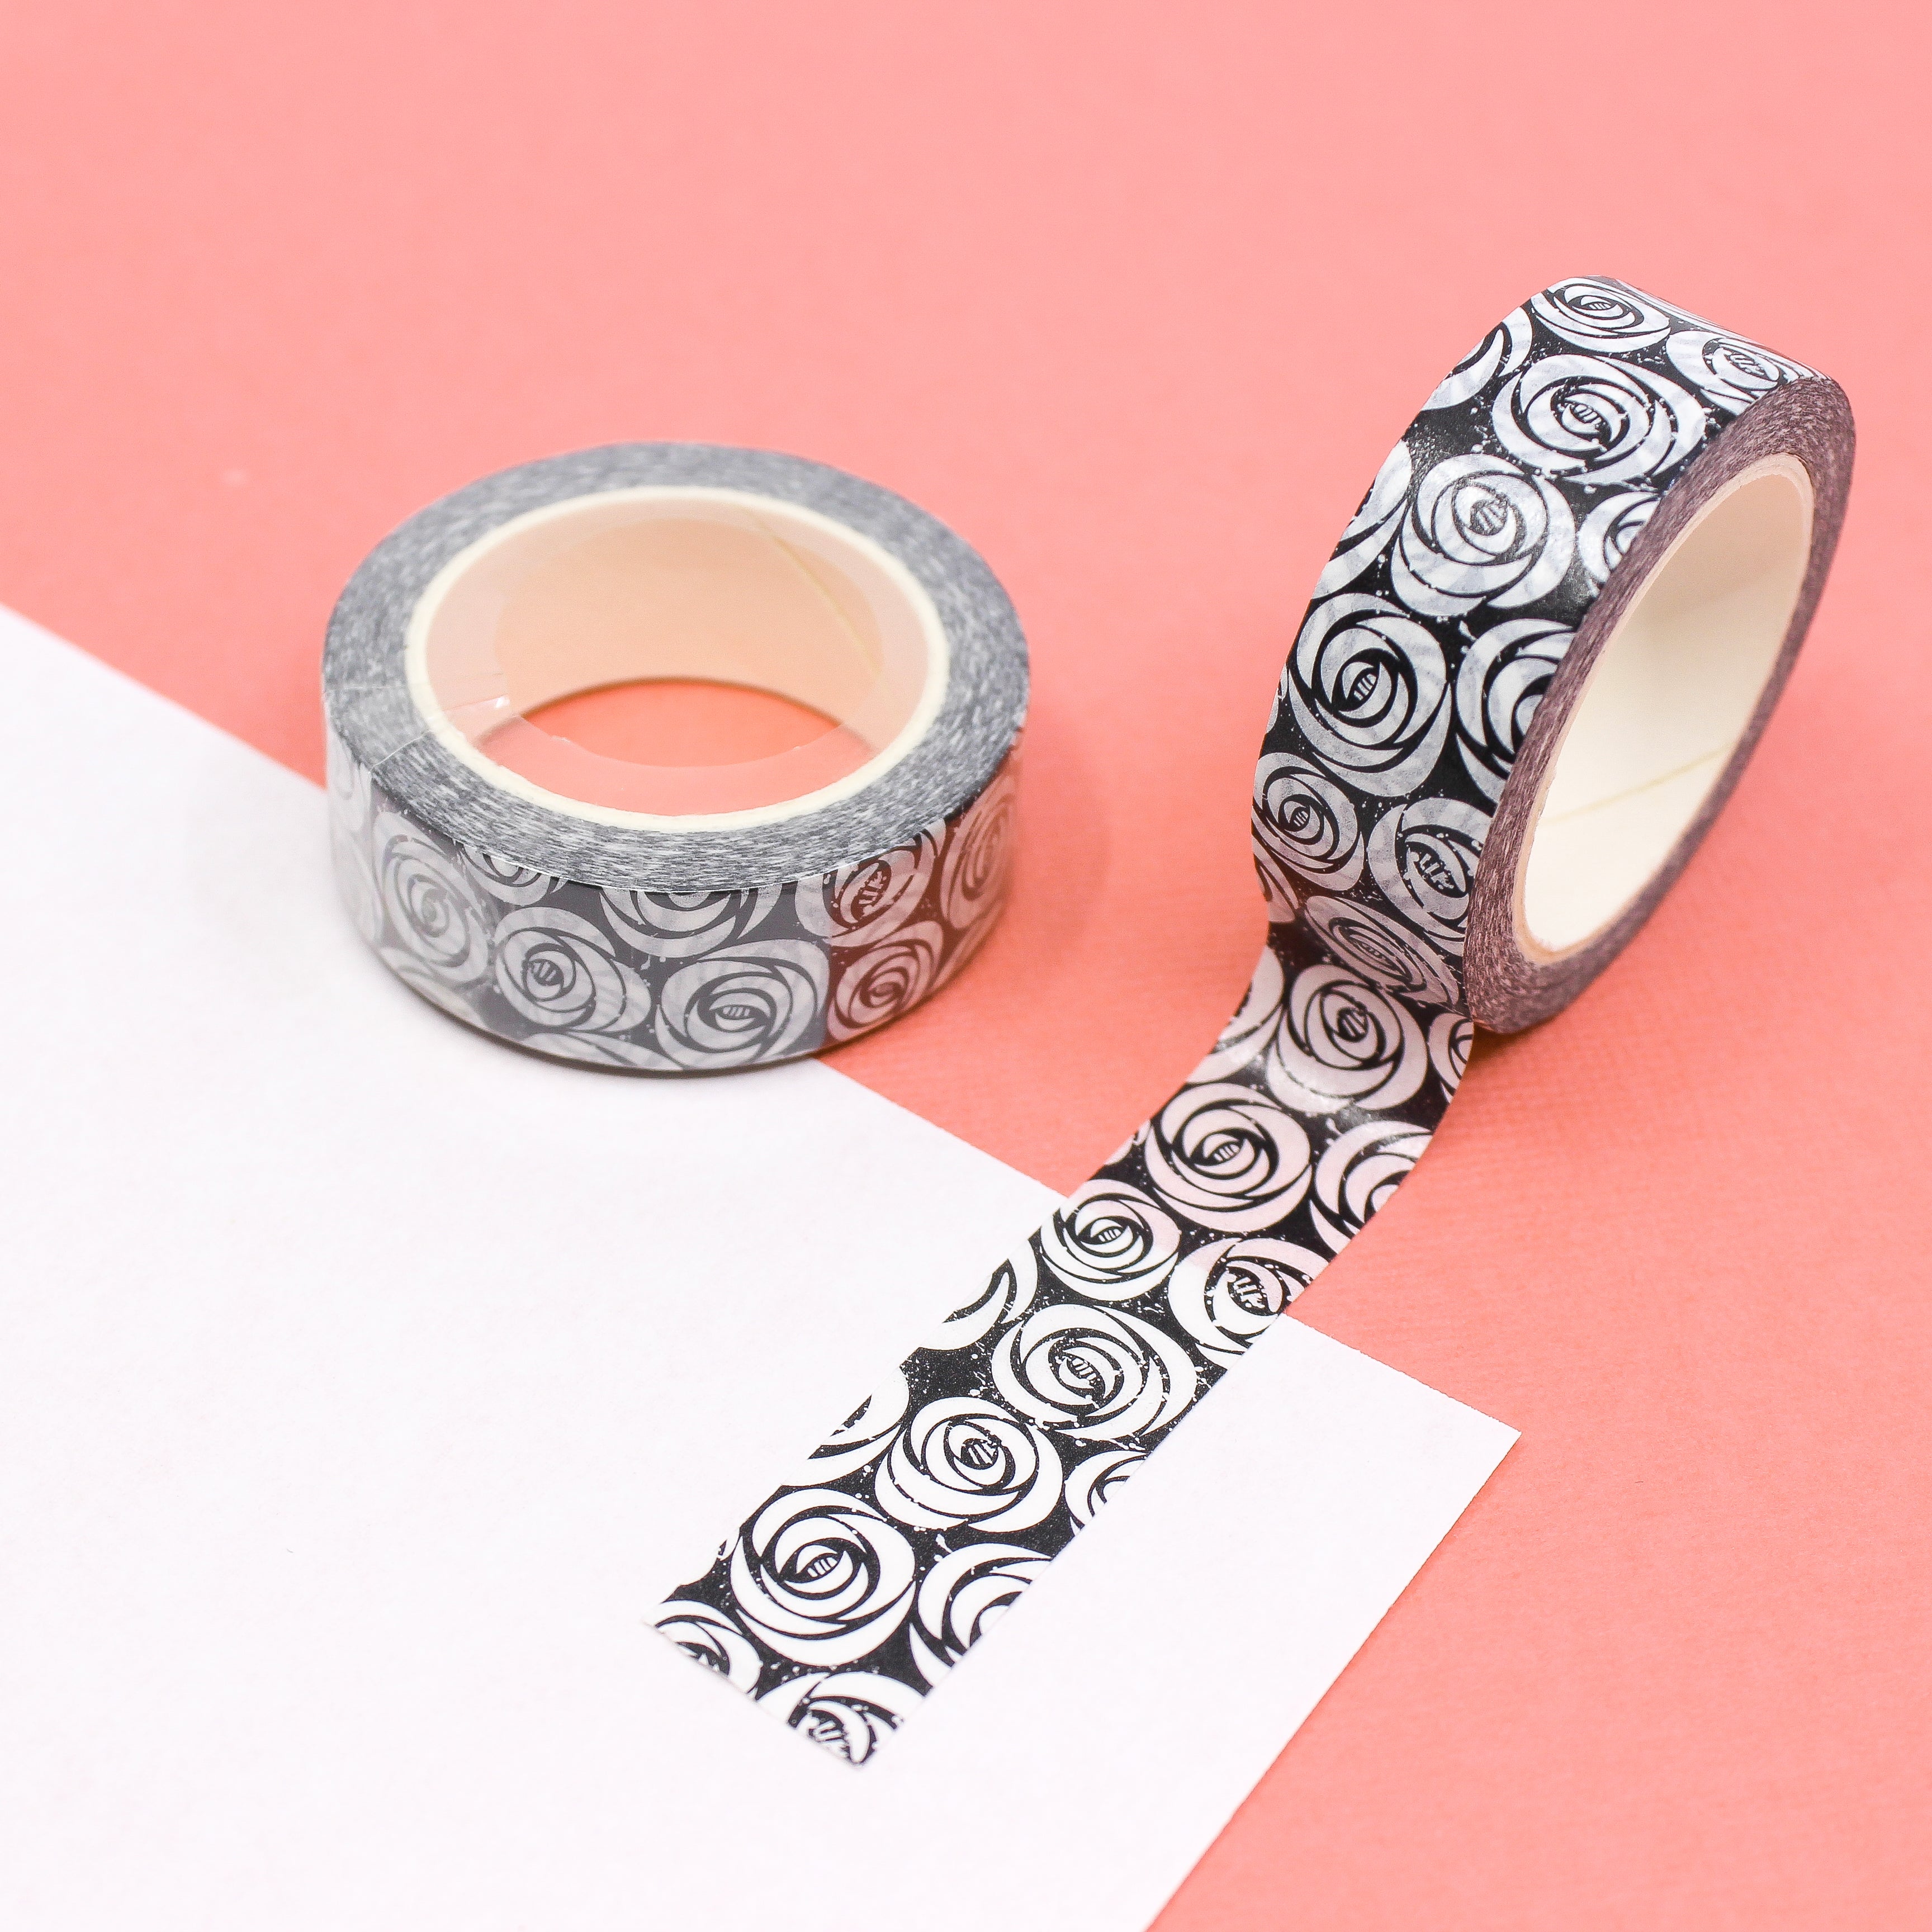 This is a black and white rose themed washi tape from BBB Supplies Craft Shop